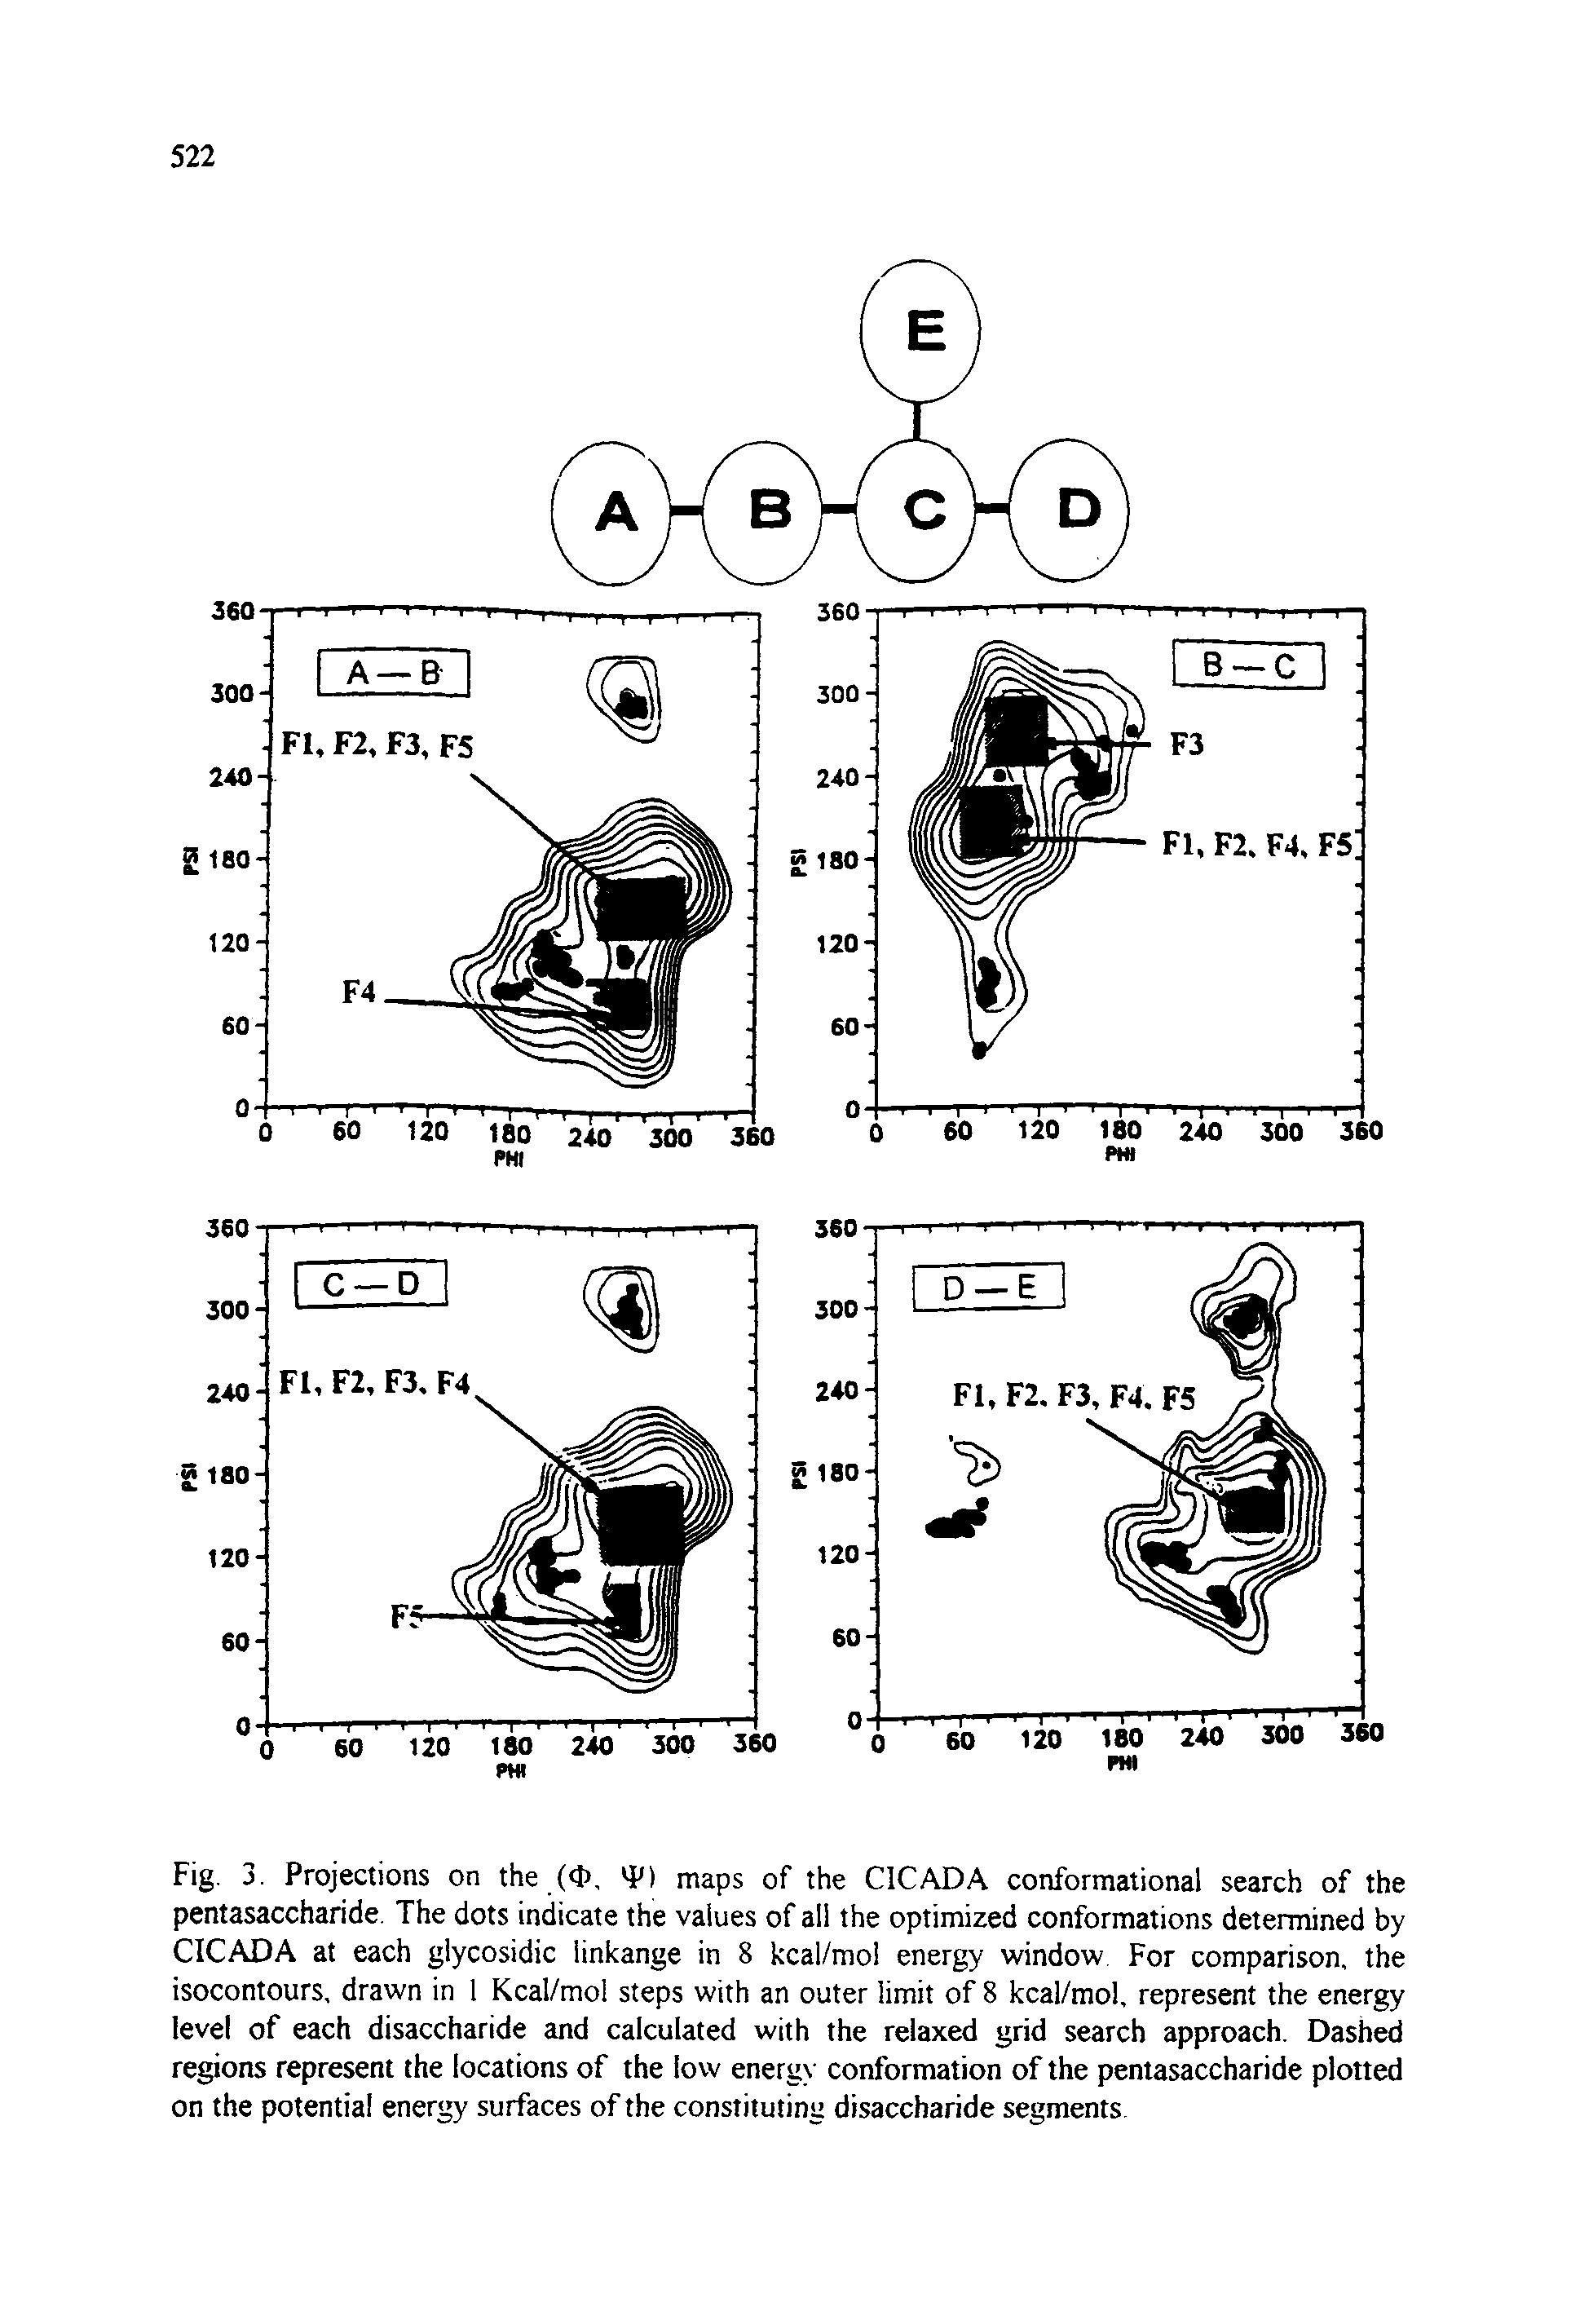 Fig. 3. Projections on the (<1>, maps of the CICADA conformational search of the pentasaccharide. The dots indicate the values of all the optimized conformations determined by CICADA at each glycosidic linkange in 8 kcal/mol energy window For comparison, the isocontours, drawn in 1 Kcal/mol steps with an outer limit of 8 kcal/mol, represent the energy level of each disaccharide and calculated with the relaxed grid search approach. Dashed regions represent the locations of the low energy conformation of the pentasaccharide plotted on the potential energy surfaces of the constituting disaccharide segments...